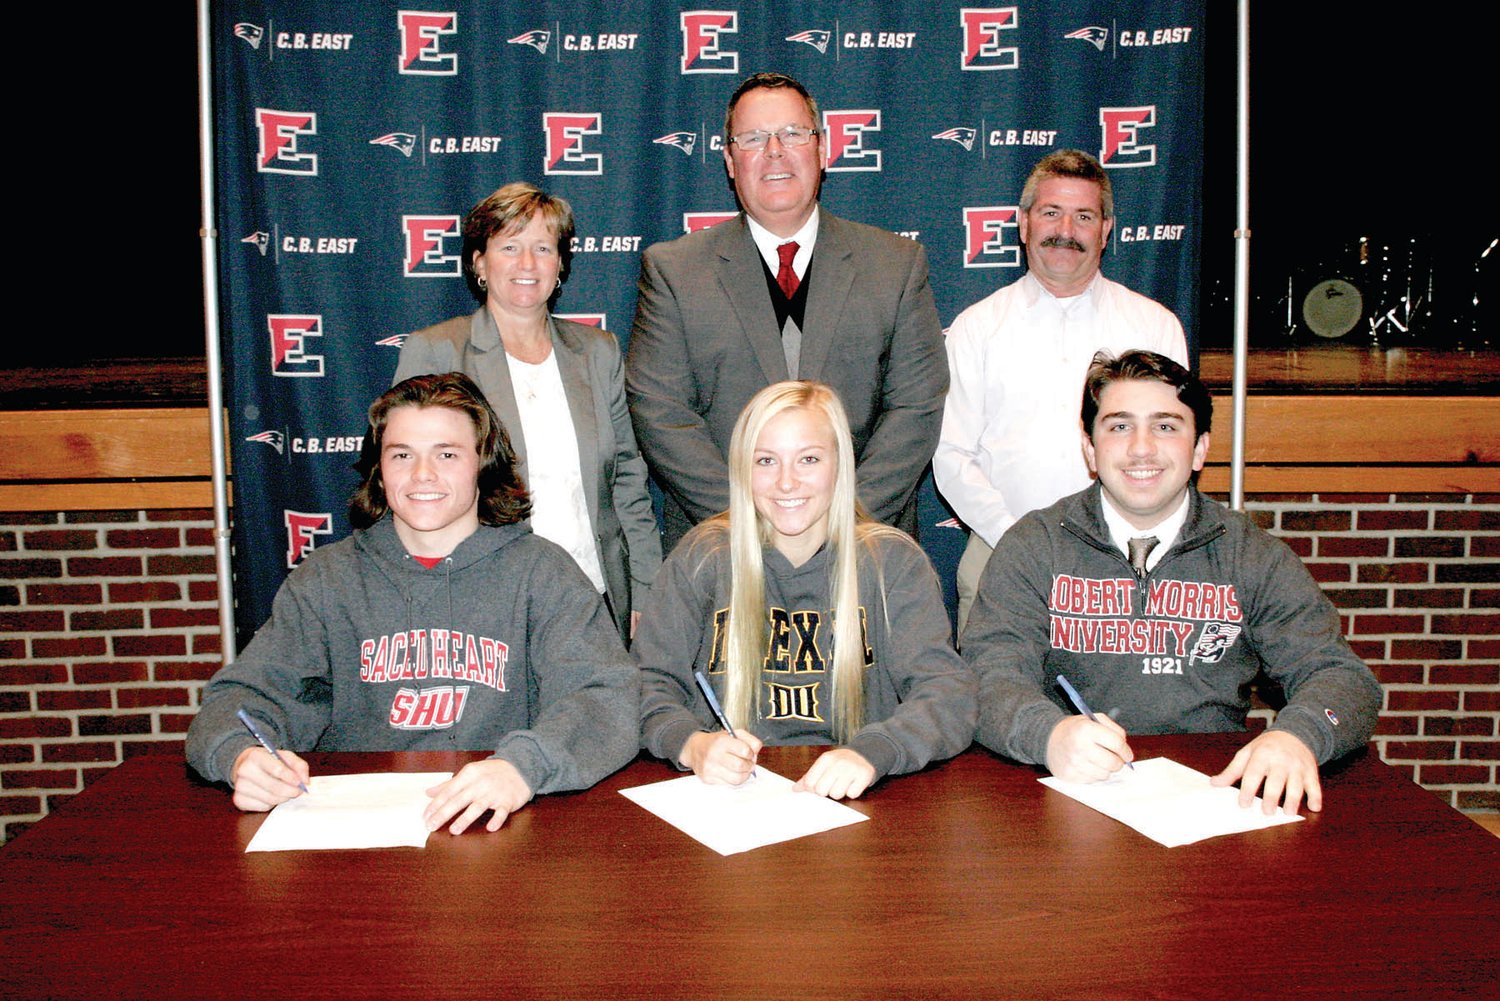 CB East seniors, from left, front row, Ryan Stout, Cailey Lever and Liam Rosenthal sign letters of intent to play at Sacred Heart, Drexel and Robert Morris universities, respectively. Joining the trio at the signing ceremony are, from left, back row, Principal Lori Gallagher-Landis, Class of 2019 House Principal Luke Hadfield and Athletic Director John Reading. Photograph by Mary Jane Souder